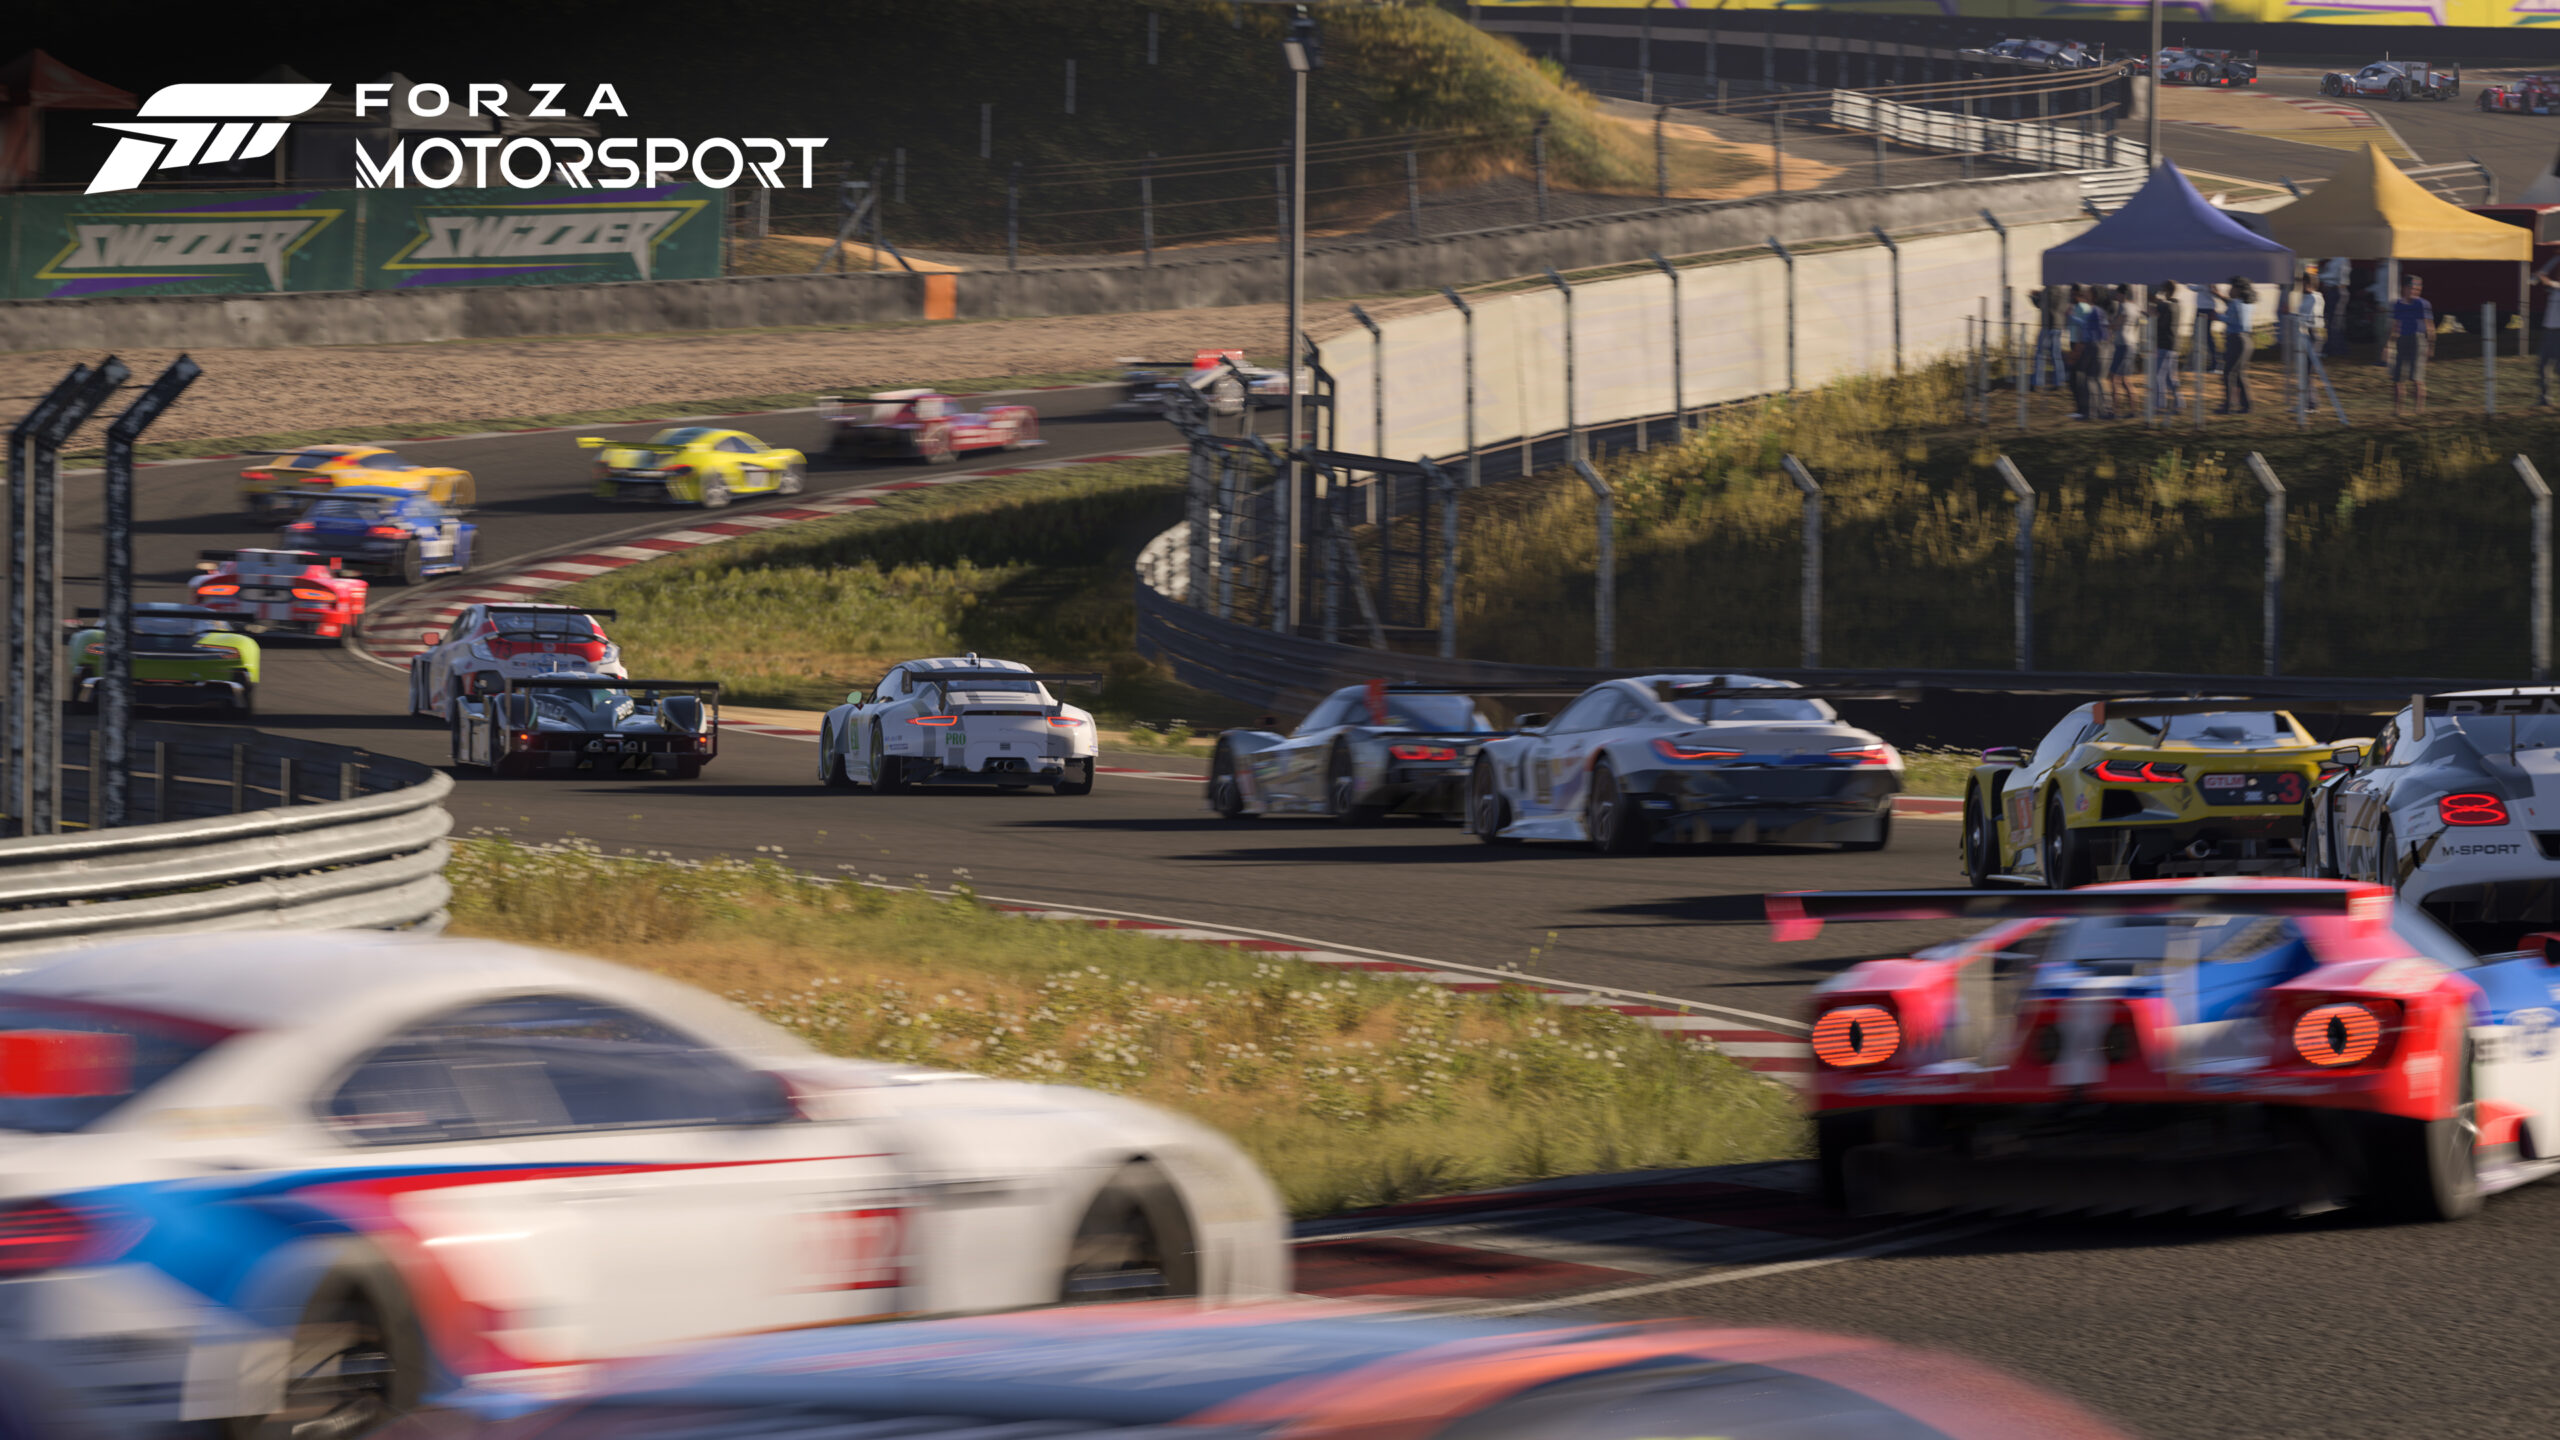 Forza Motorsport preview